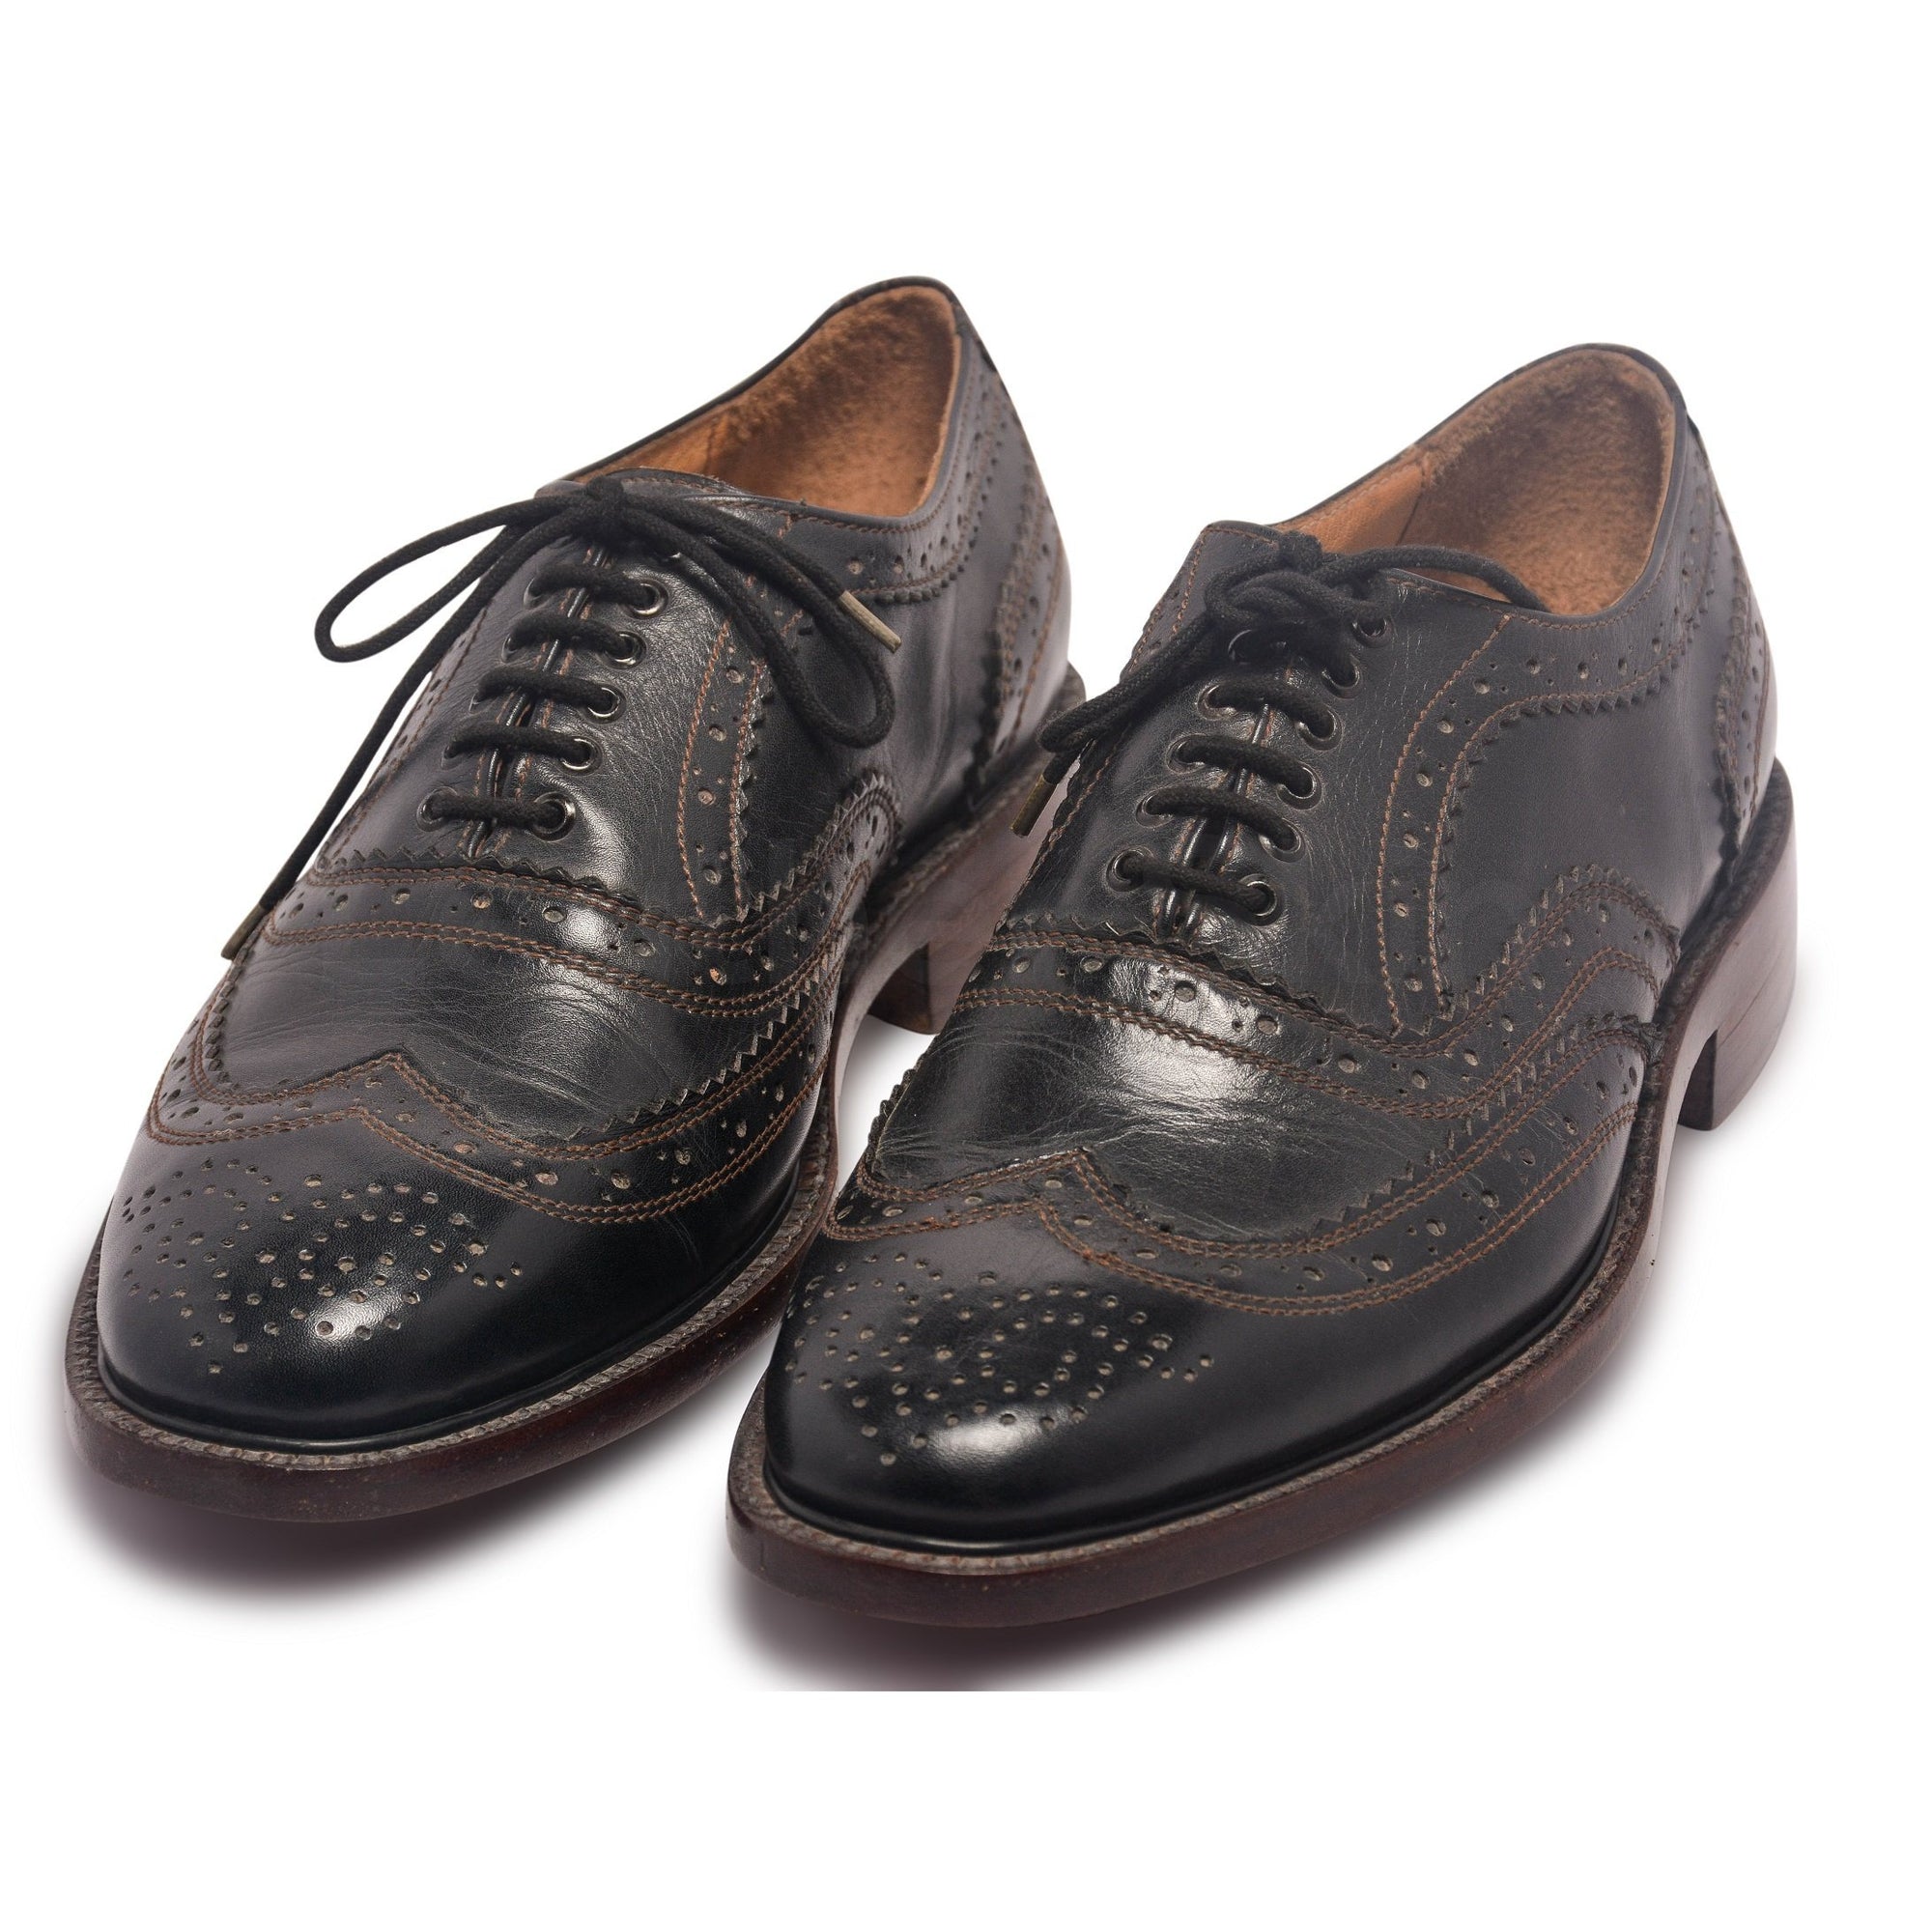 mens black shoes with brown stitching